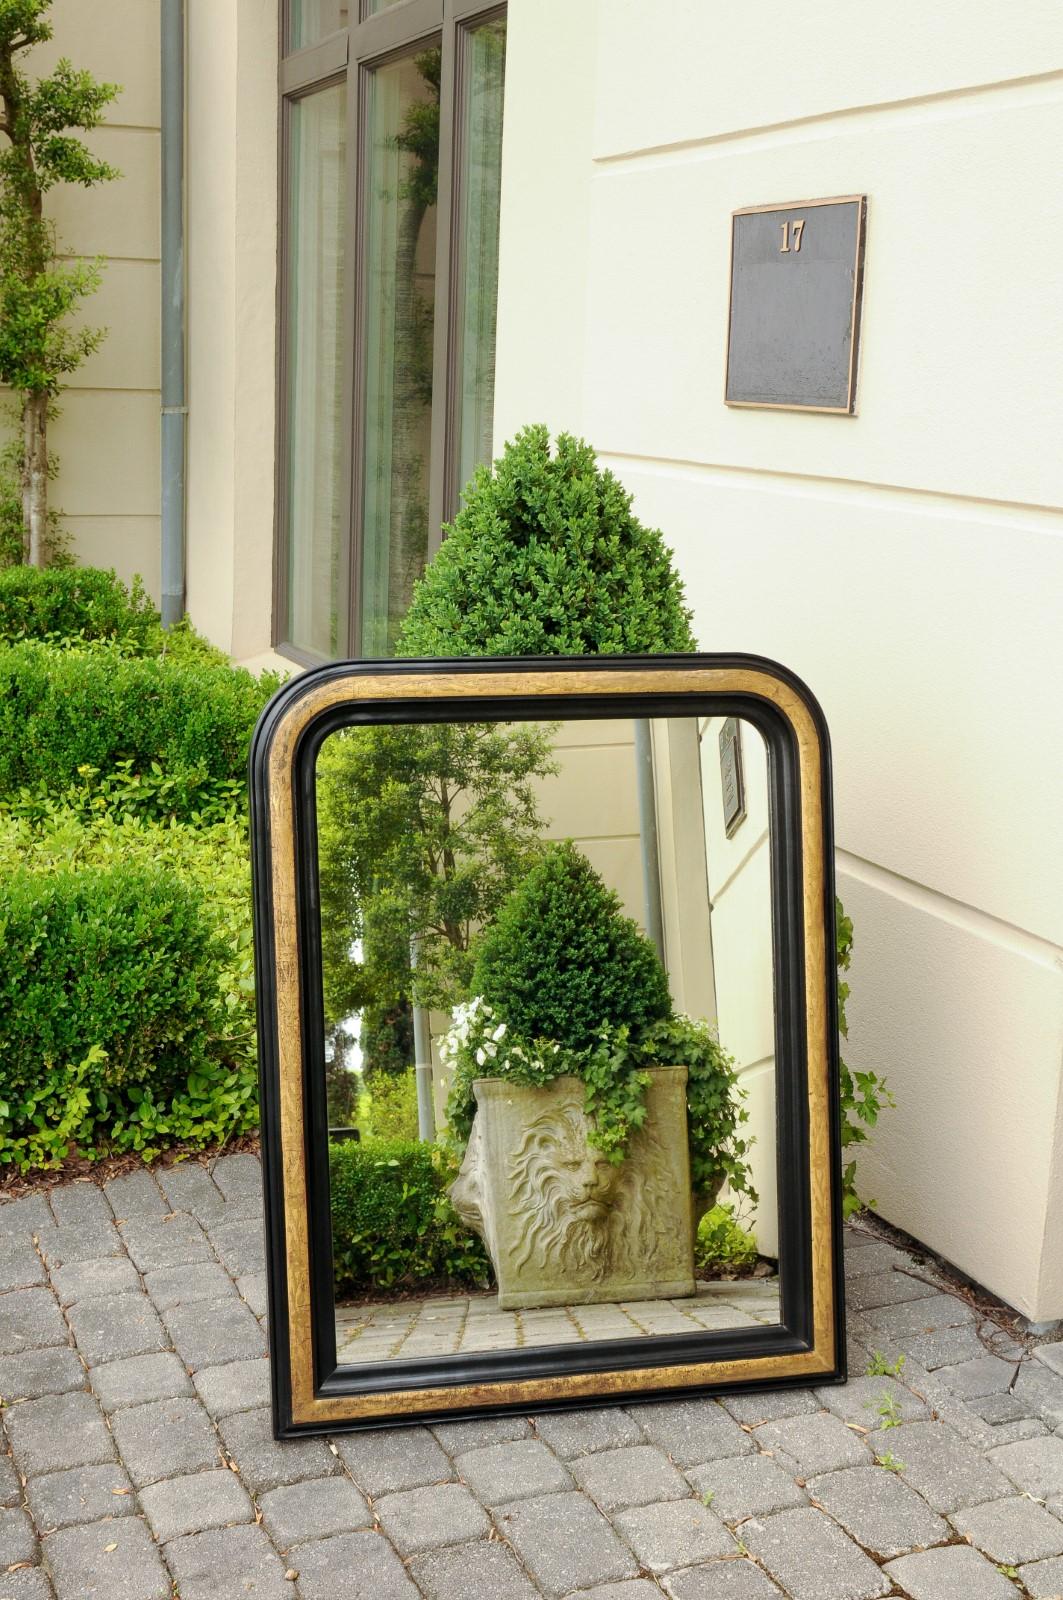 A French Louis-Philippe style wall mirror from the early 20th century, with gilded and ebonized accents. Born in France during the early years of the 20th century, this exquisite mirror presents the stylistic characteristics of the Louis-Philippe